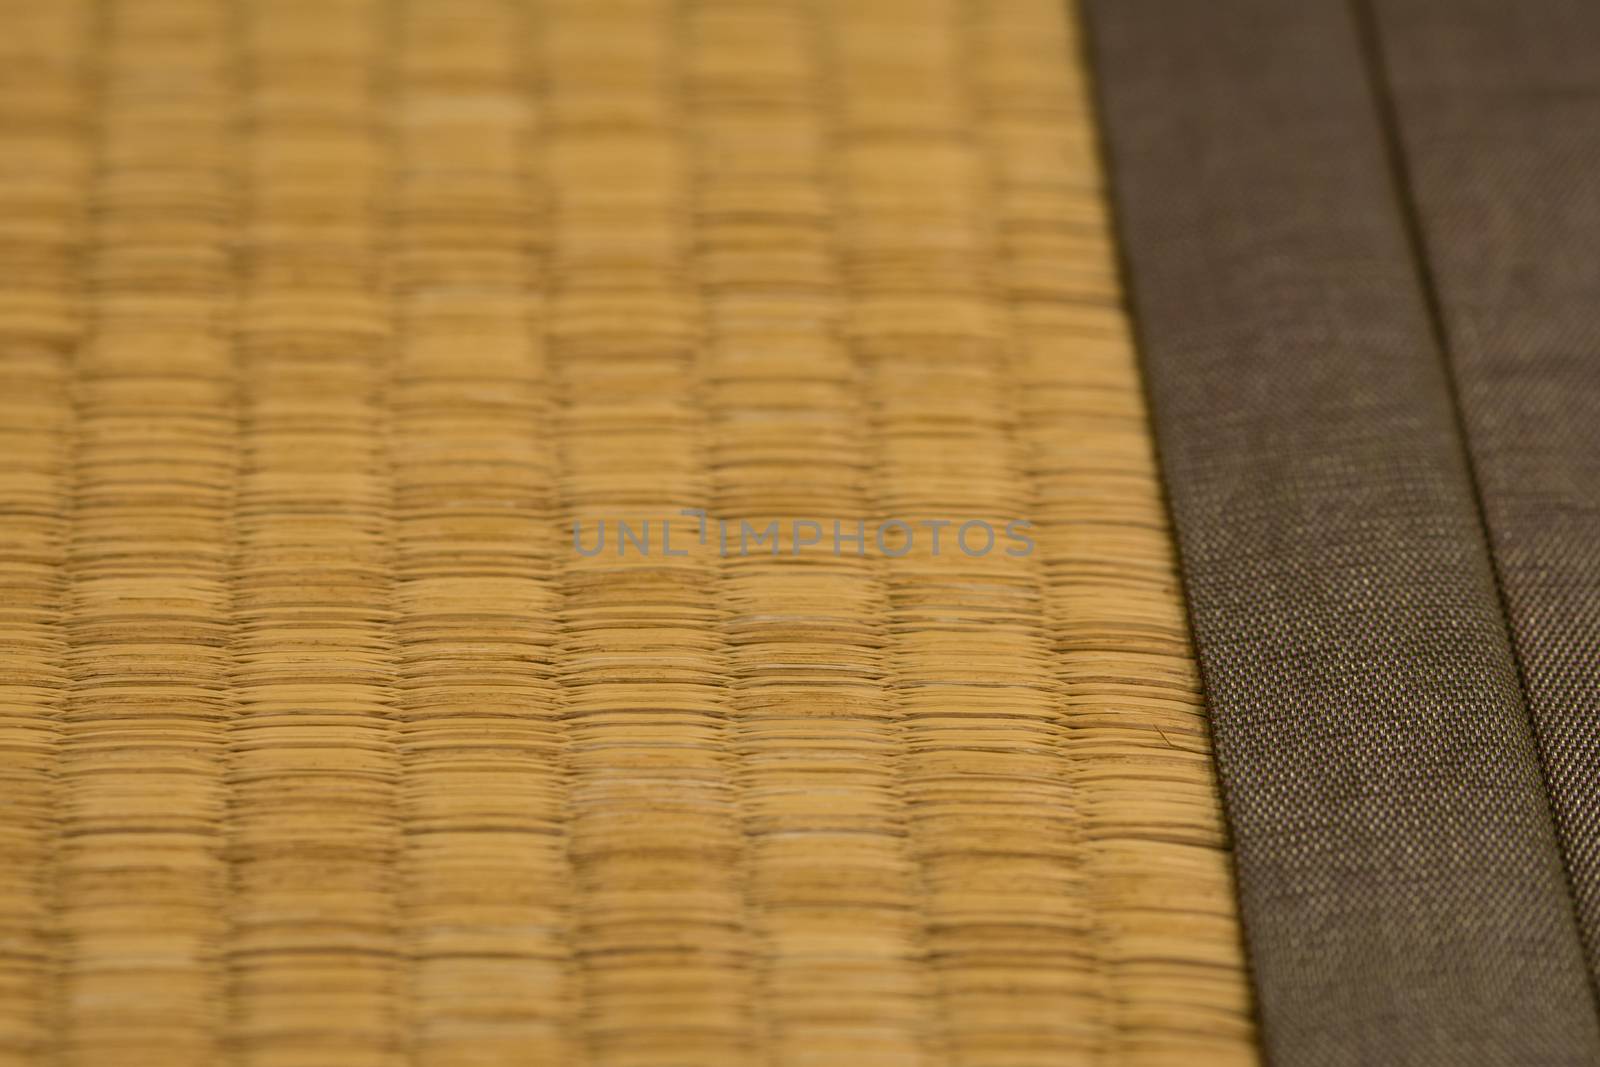 A close up shot of a Japanese Tatami mat made from straw.